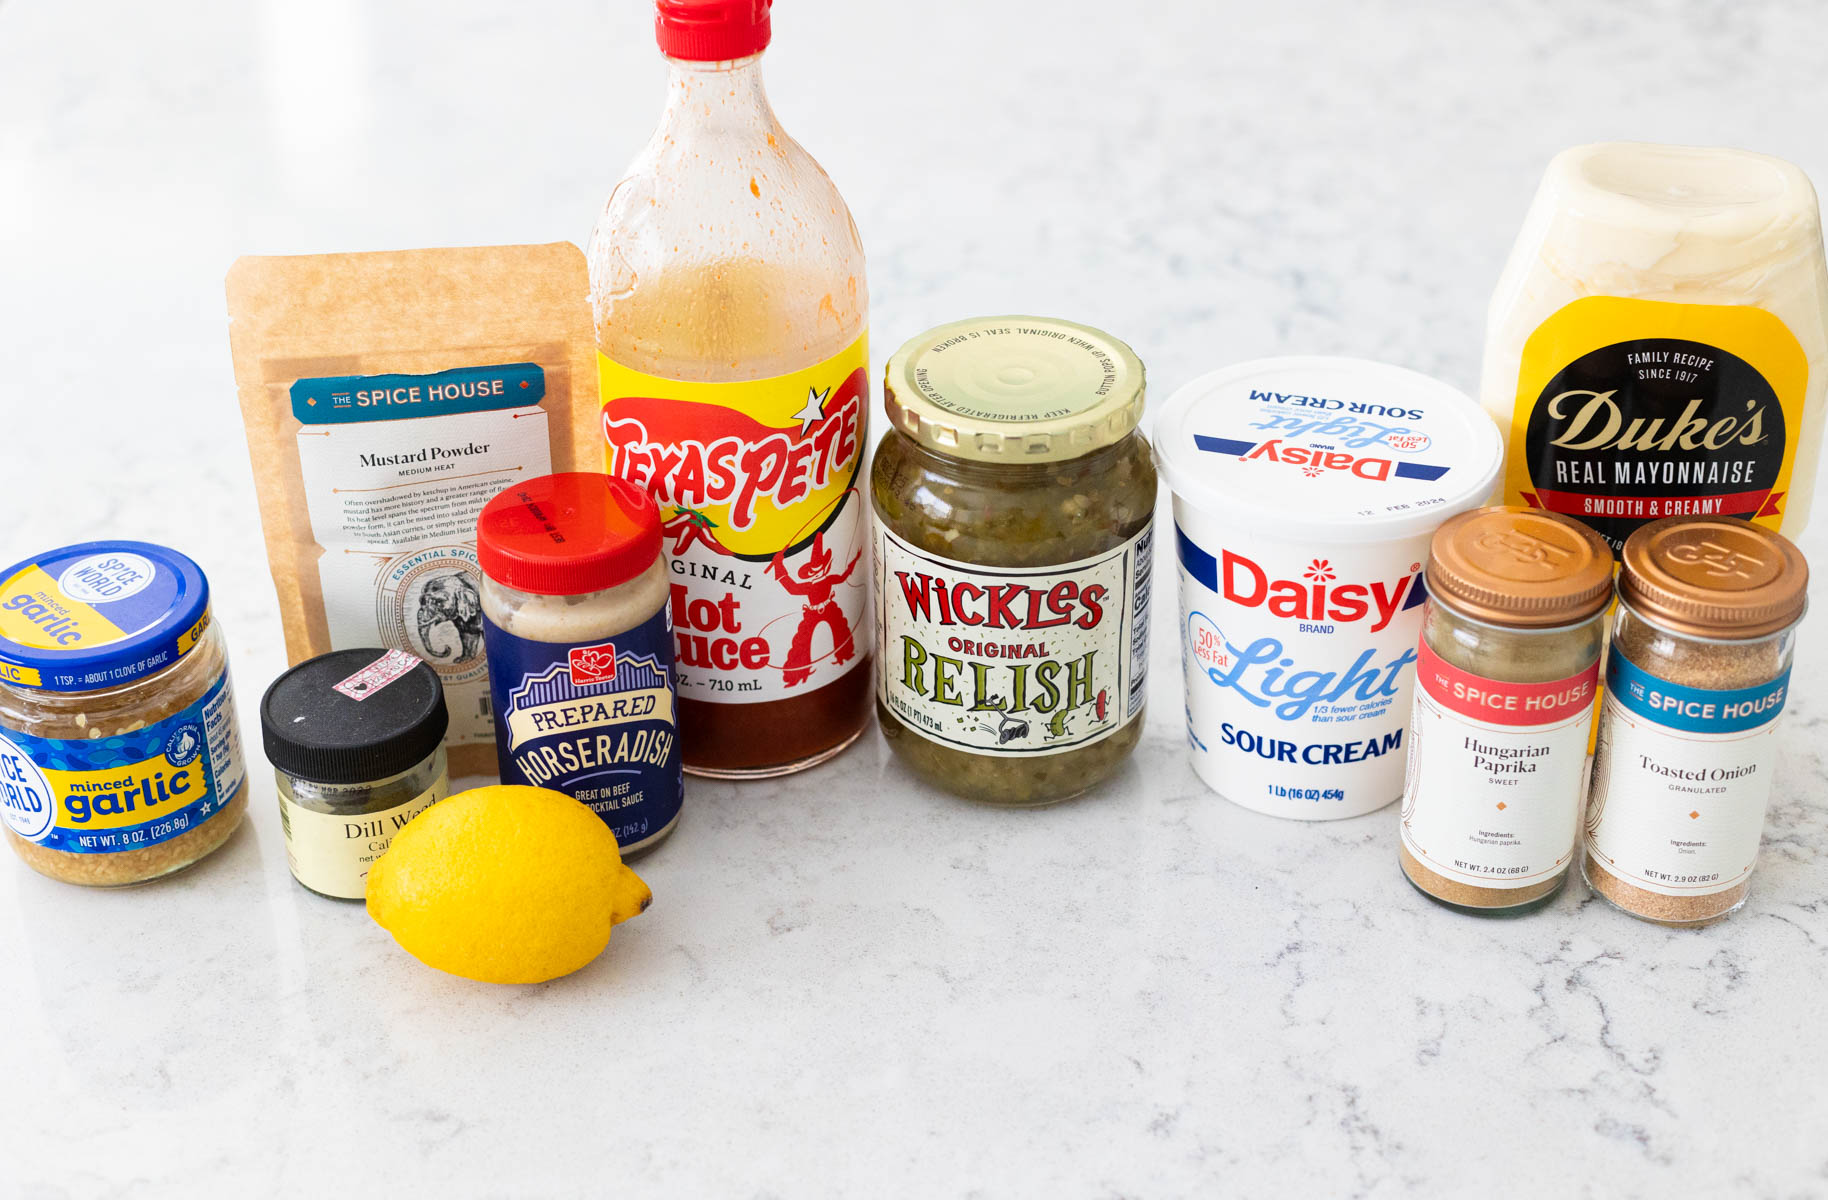 The ingredients to make homemade tartar sauce for fish are on the counter.